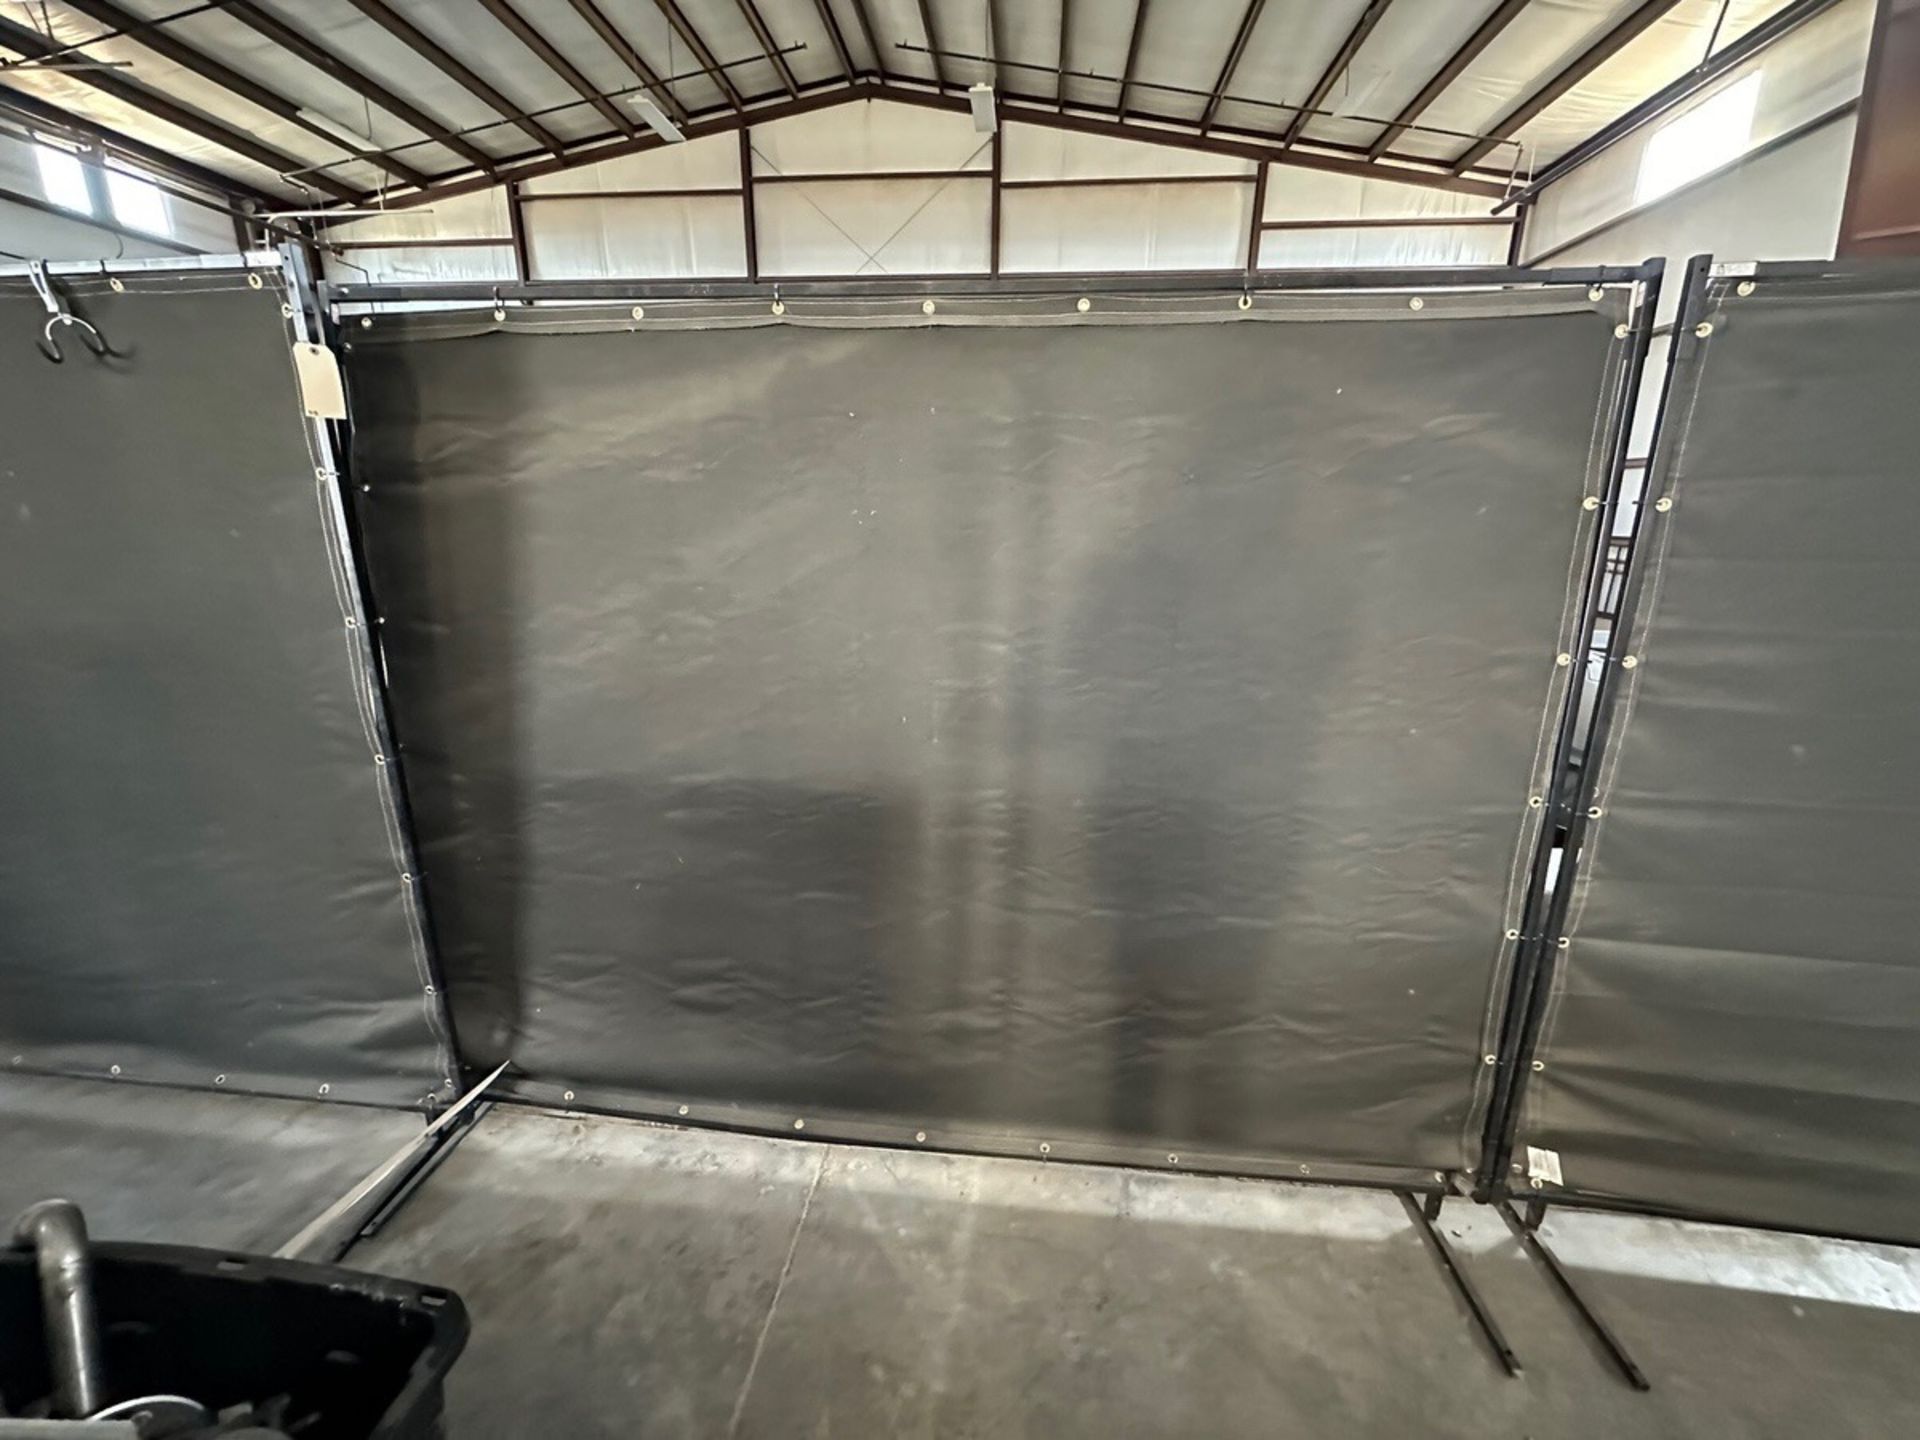 6 Welding Curtains | Rig Fee $50 - Image 3 of 6